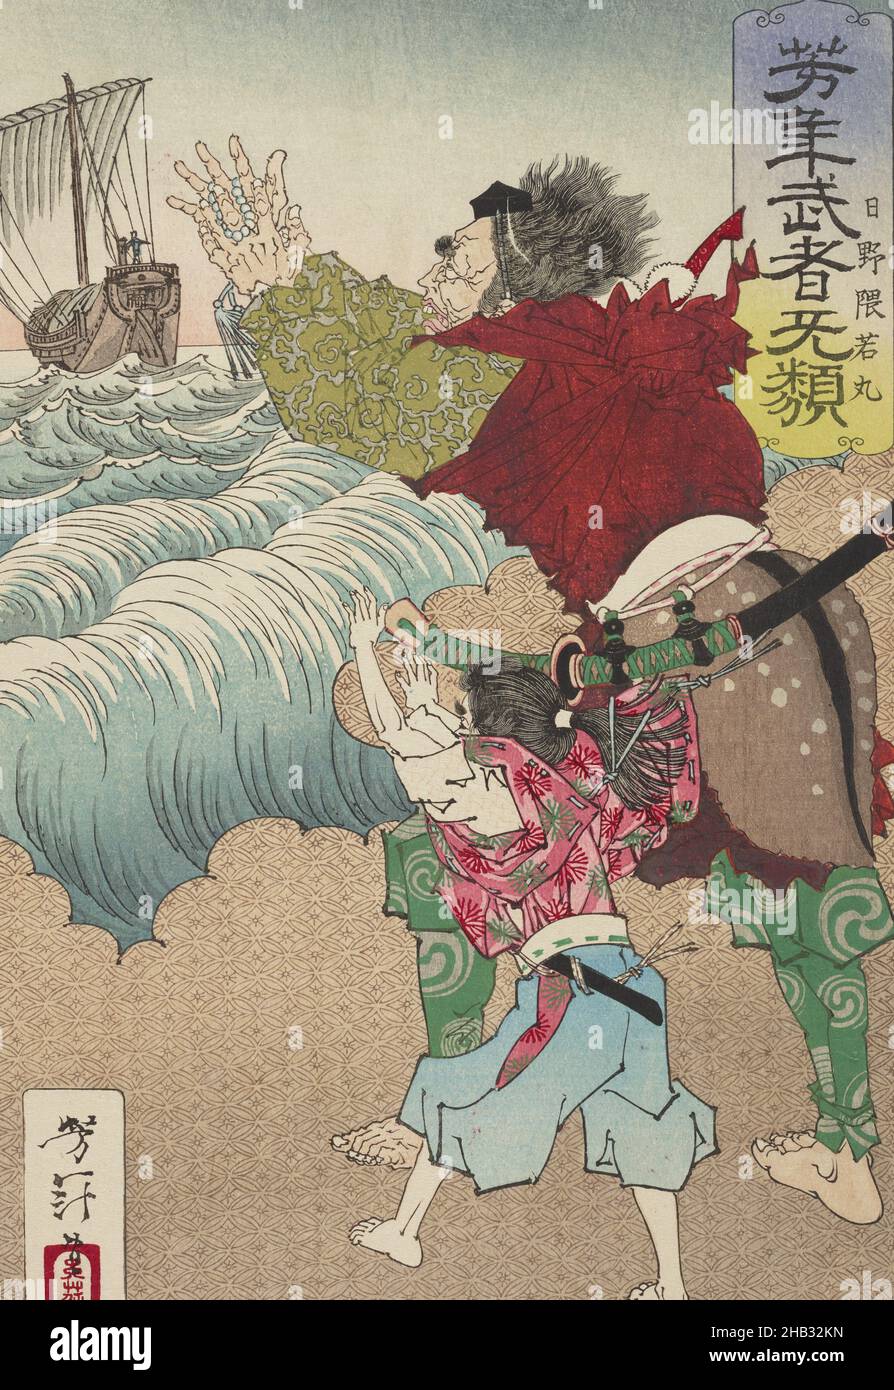 Courageous Warriors (Musha burui): 14: Hino Kumawaka and the priest calling back the boat, Tsukioka Yoshitoshi, artist, 1883-1886, Tokyo, Tsukioka Yoshitoshi’s (1839-1892) career spanned the late Edo and early Meiji periods. He trained in the ie ‘studio’ of Utagawa Kuniyoshi (1798-1861). His early works gave late Utagawa school theatricality an even greater sense of energy. A taste for lurid melodrama became progressively grotesque as he experienced periods of depression and hospitalisation that interrupted his professional activities. Stock Photo